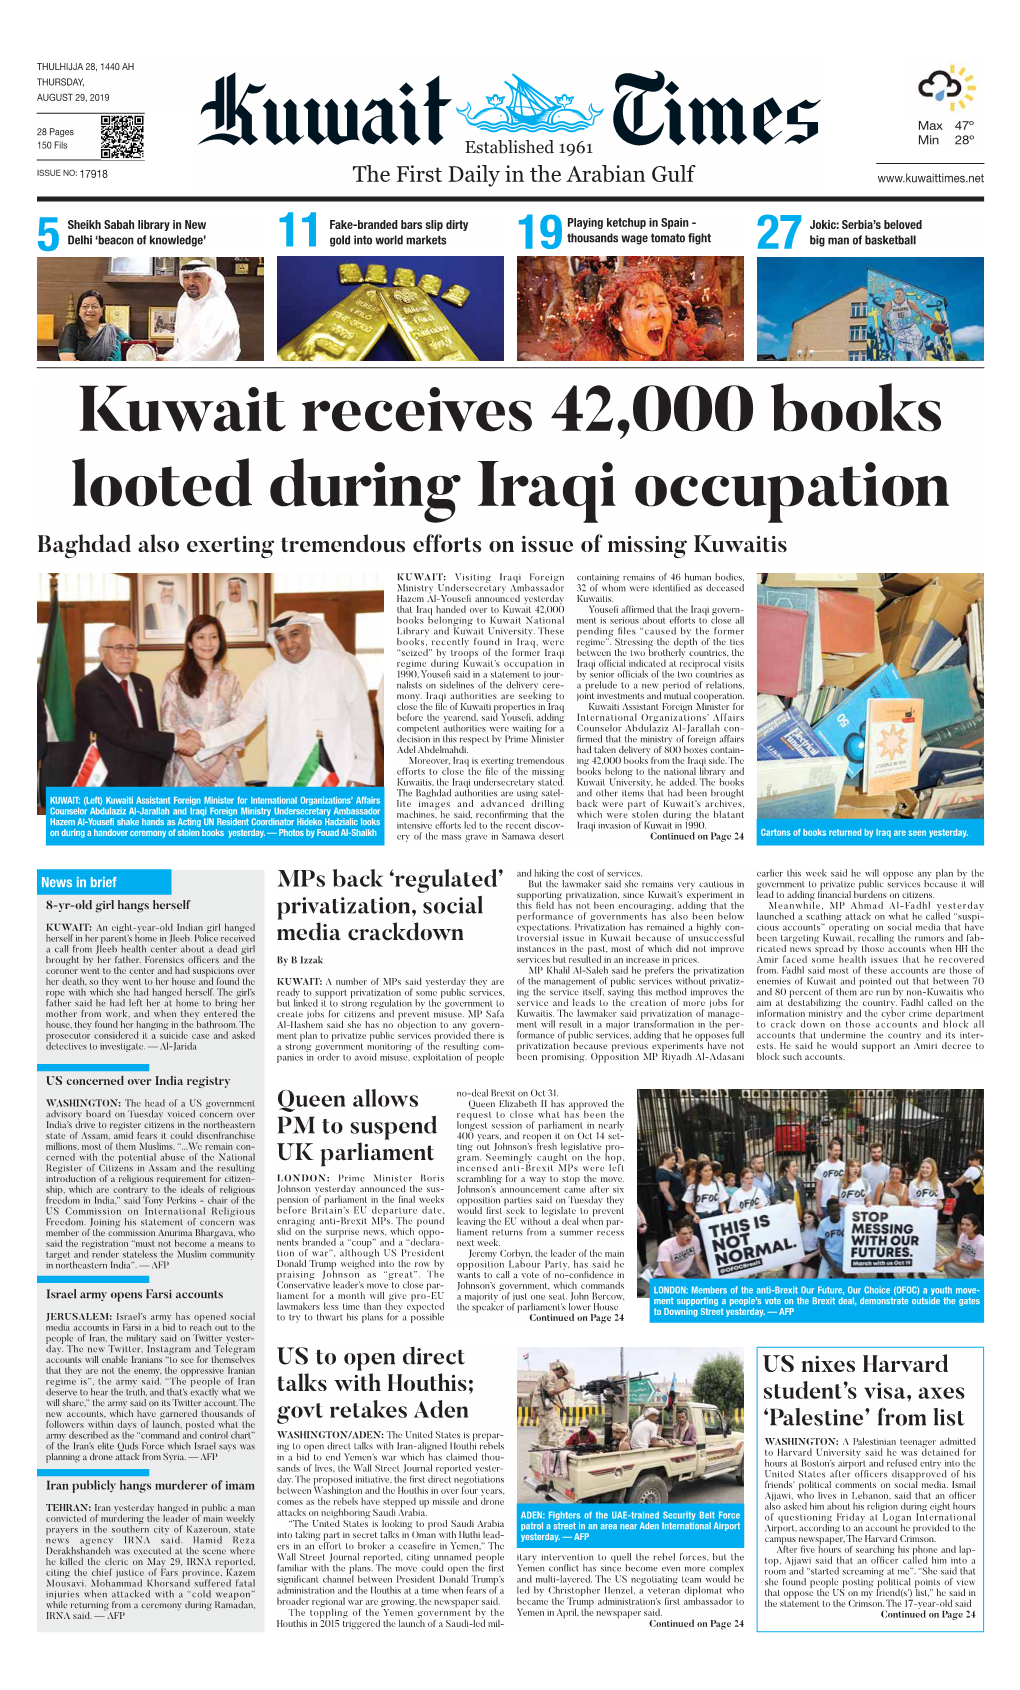 Kuwait Receives 42,000 Books Looted During Iraqi Occupation Baghdad Also Exerting Tremendous Efforts on Issue of Missing Kuwaitis